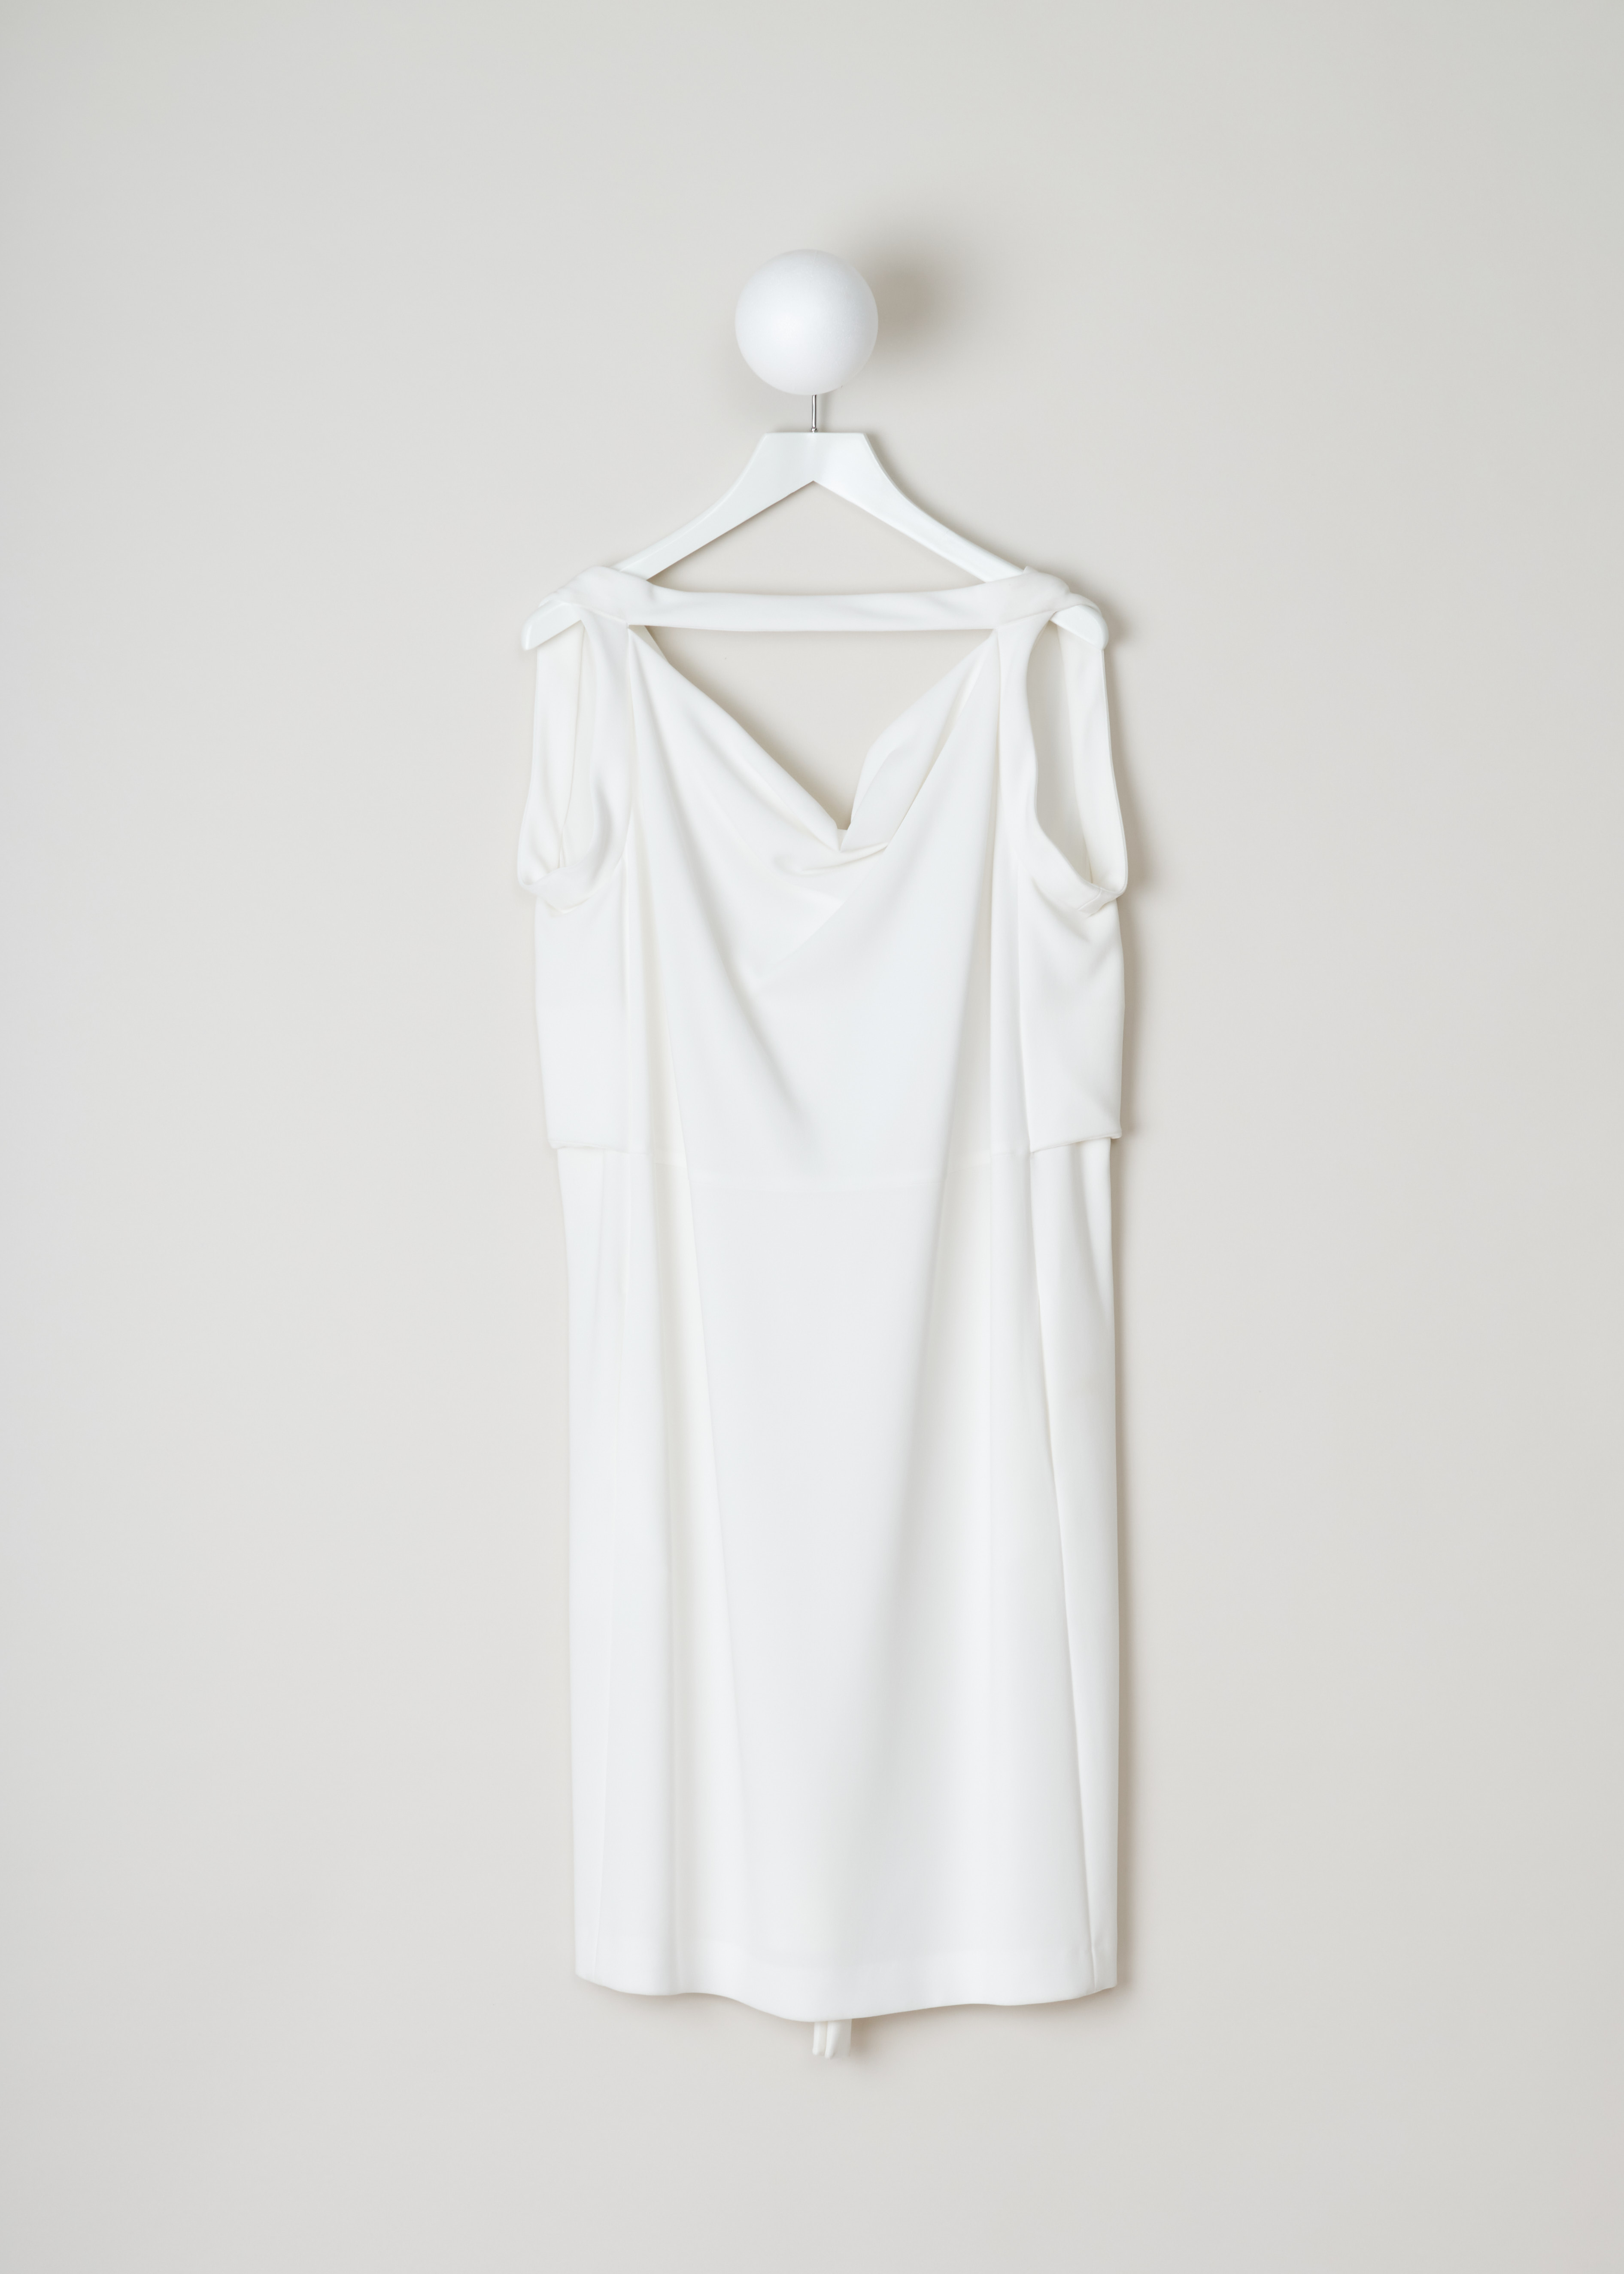 Balenciaga, Shift dress with an cowl neckline, 293704_TBDI6_9800_white, white, front Shift dress with a draped neckline plus ribbon on the front and an open back. Furthermore a decorative ribbon can be found on the back, which either can be tied on the back, or wrapped around to the front and tied there. Concealed pockets can be found on the front. 